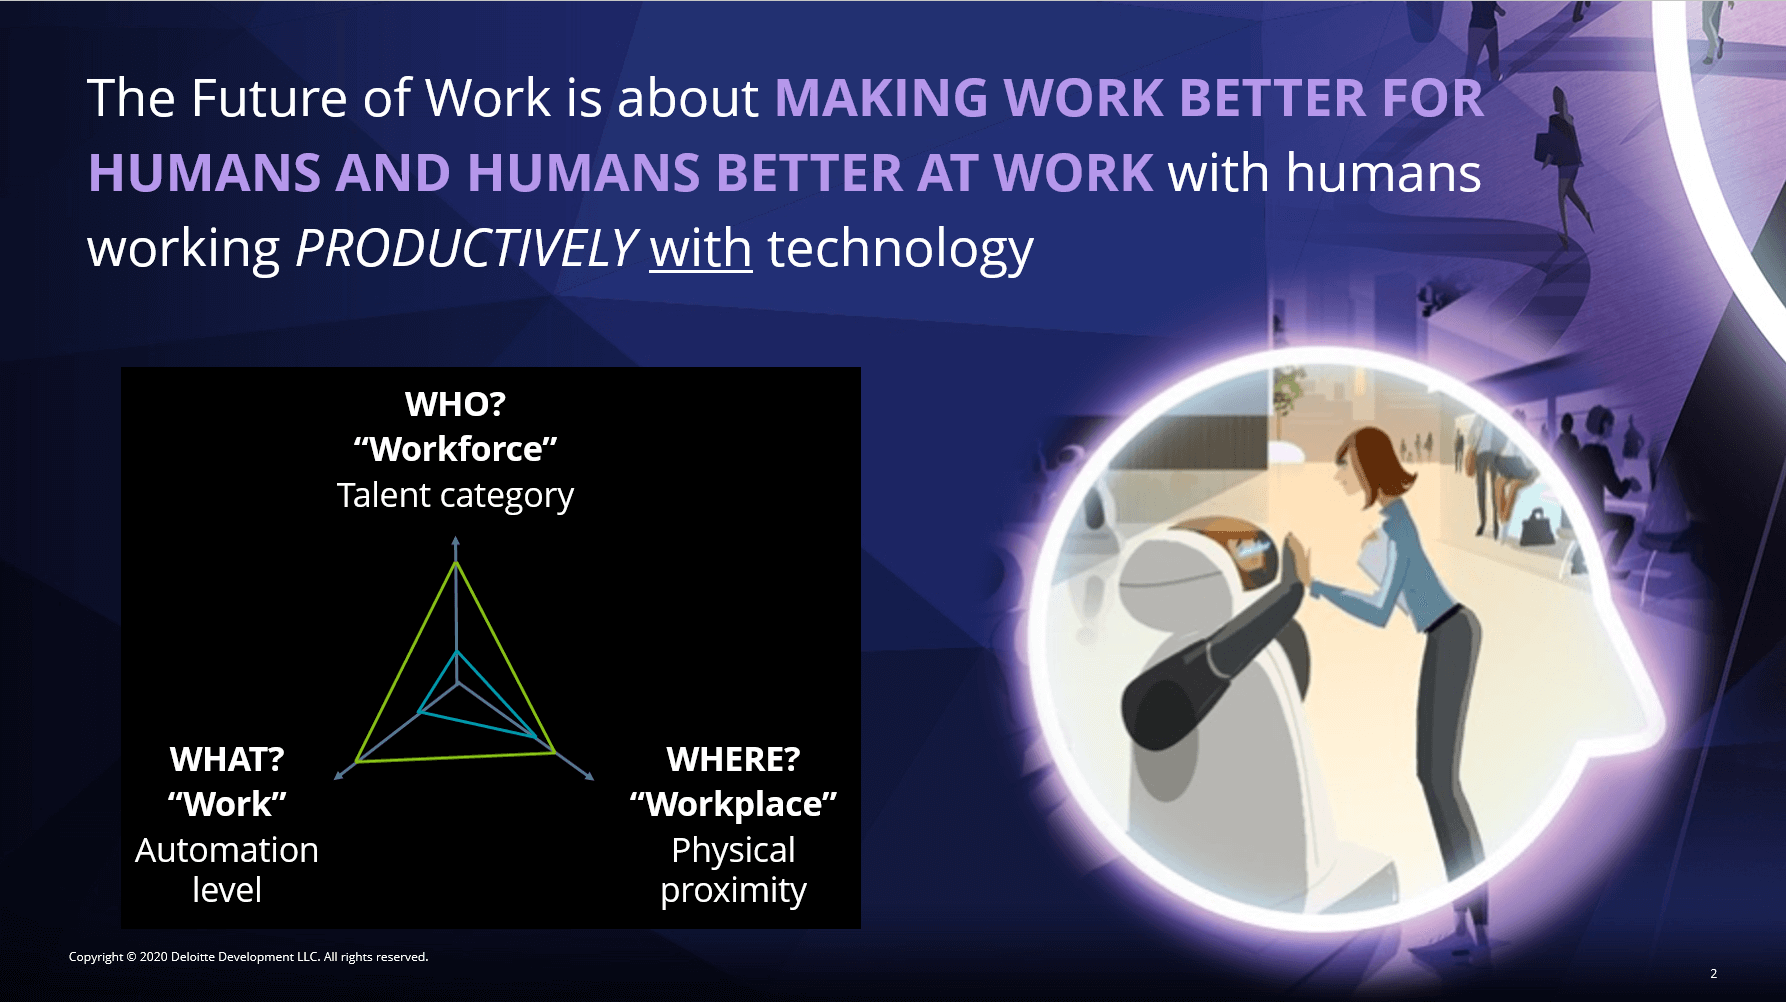 The Future of Work is about MAKING WORK BETTER FOR HUMANS AND HUMANS BETTER AT WORK with humans working PRODUCTIVELY with technology